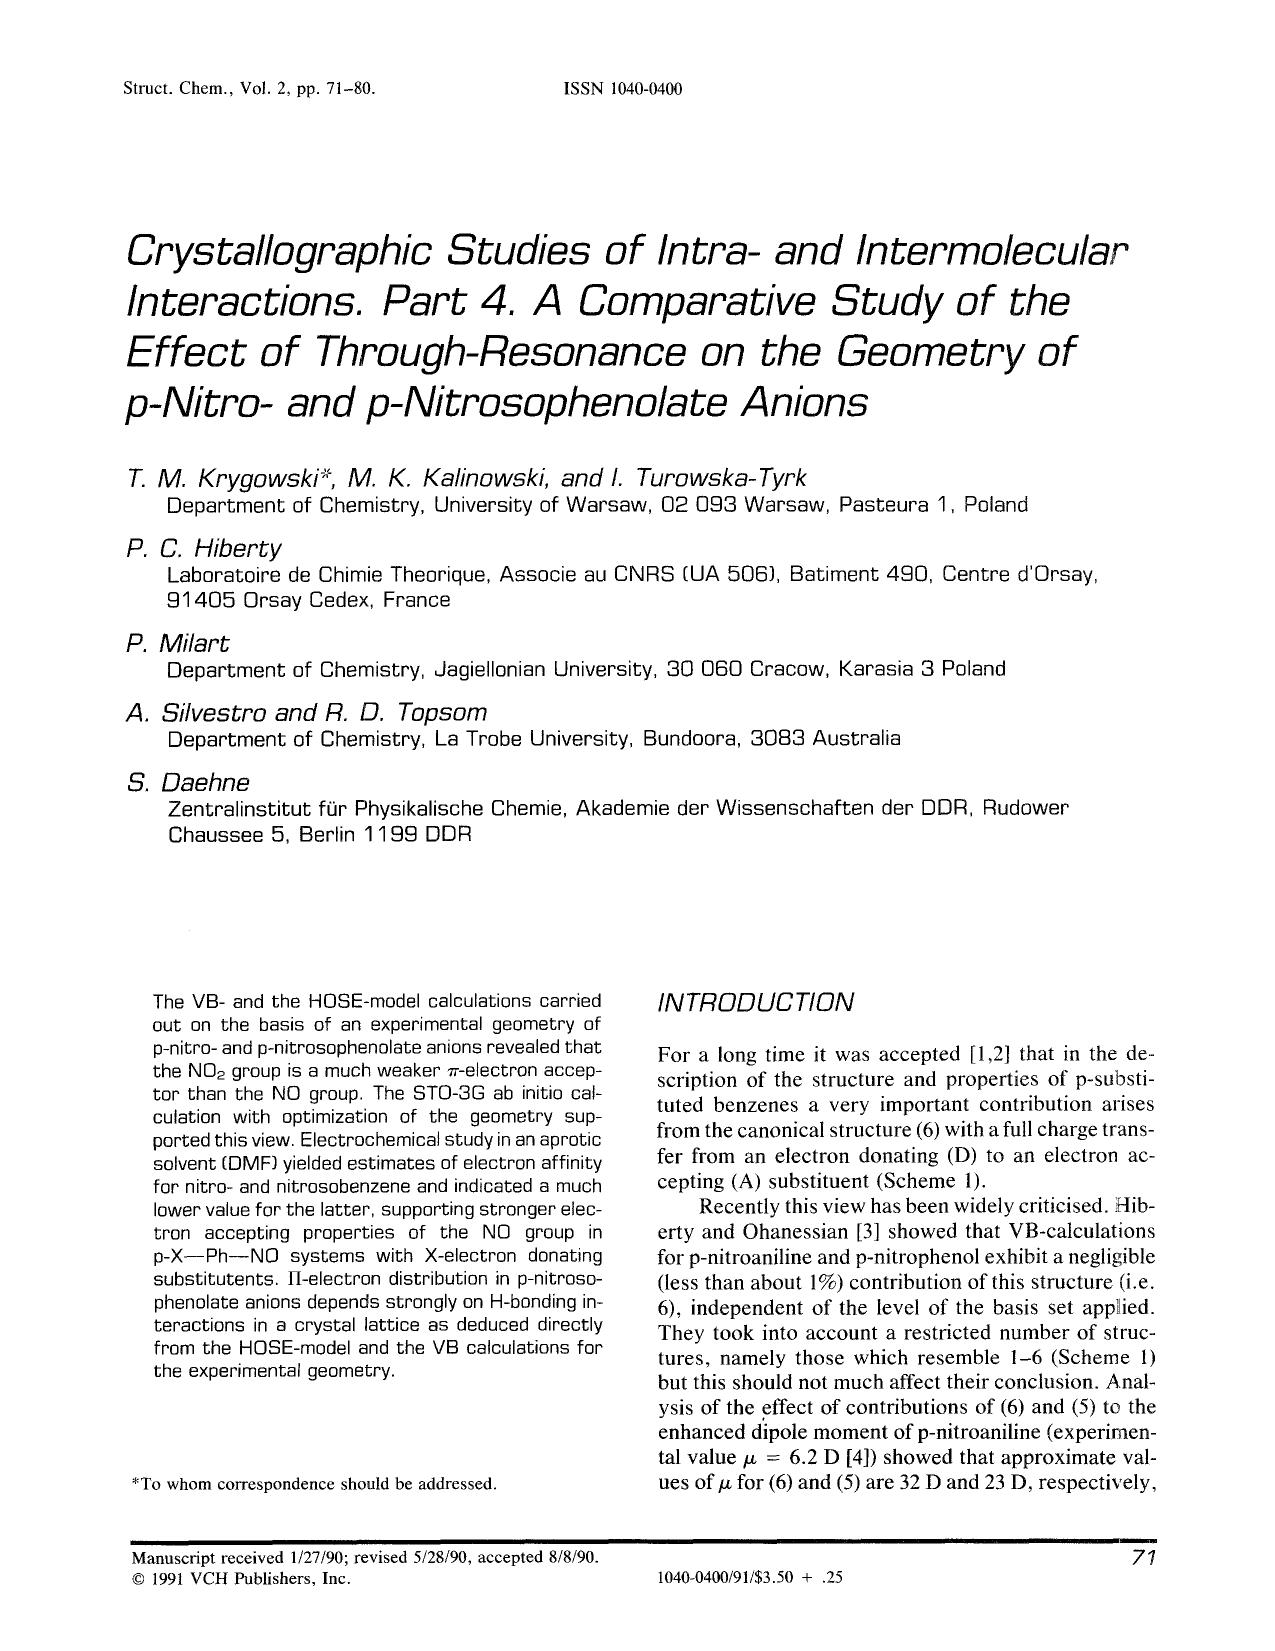 Crystallographic studies of intra- and intermolecular interactions. Part 4. A comparative study of the effect of through-resonance on the geometry of p-nitro- and p-nitrosophenolate anions by Unknown